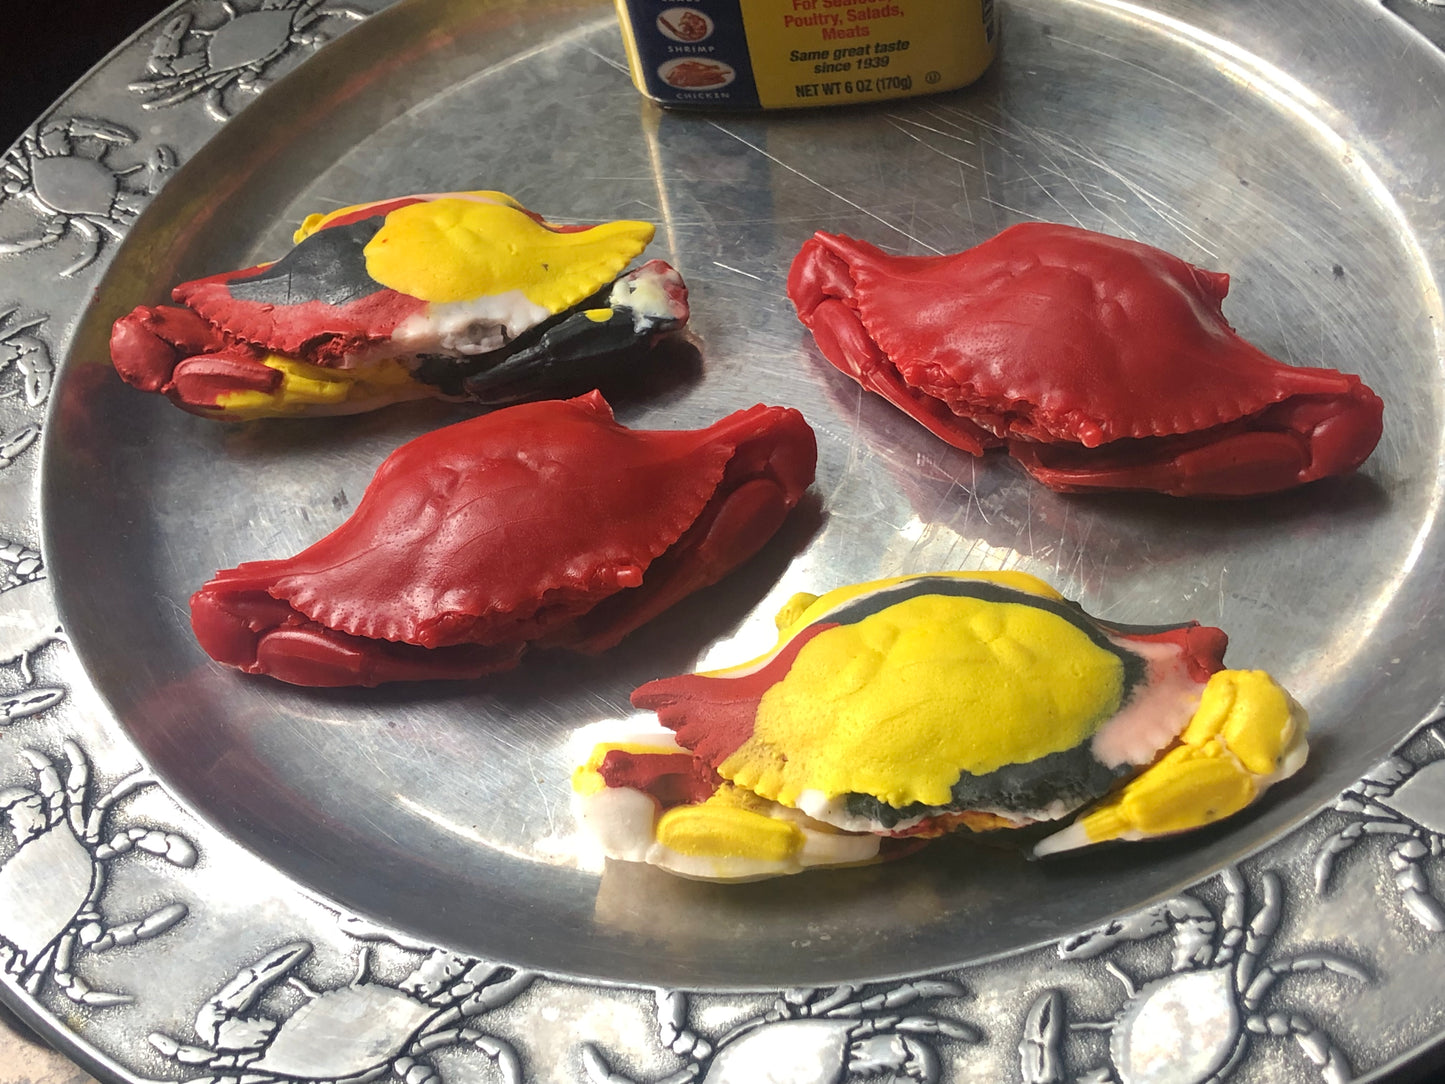 two red crab-shaped soaps and two multicolored soaps in red, black, white and yellow on a silver tray with a can of old bay seasoning in the background